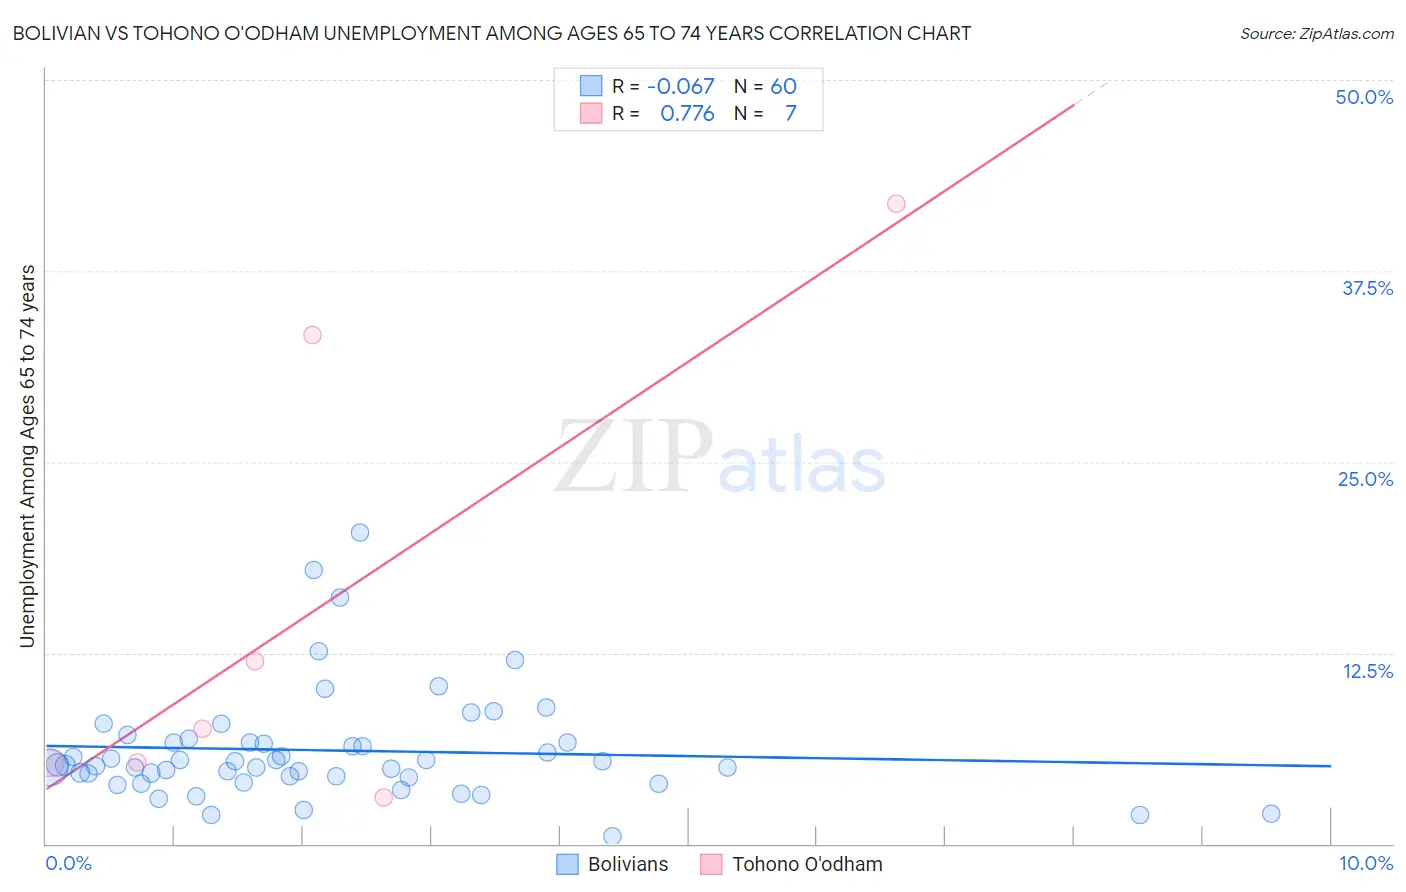 Bolivian vs Tohono O'odham Unemployment Among Ages 65 to 74 years